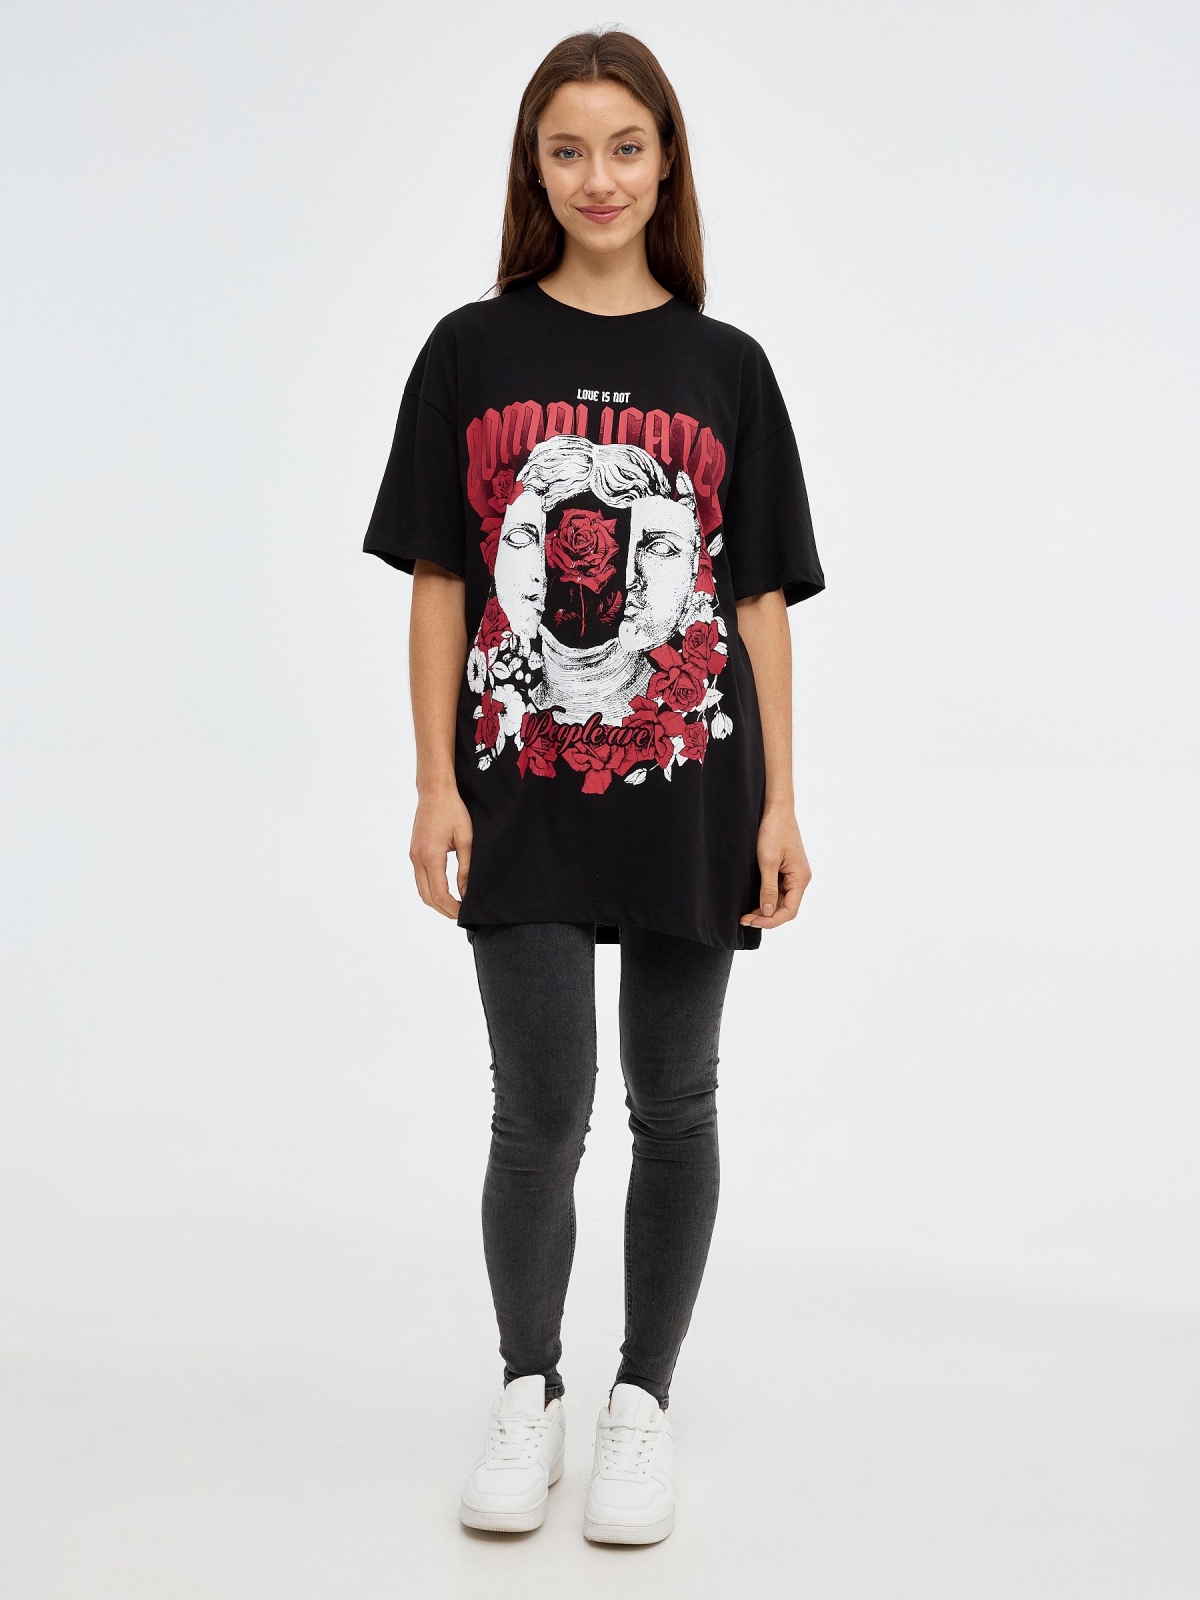 T-shirt oversized Love is Not preto vista geral frontal